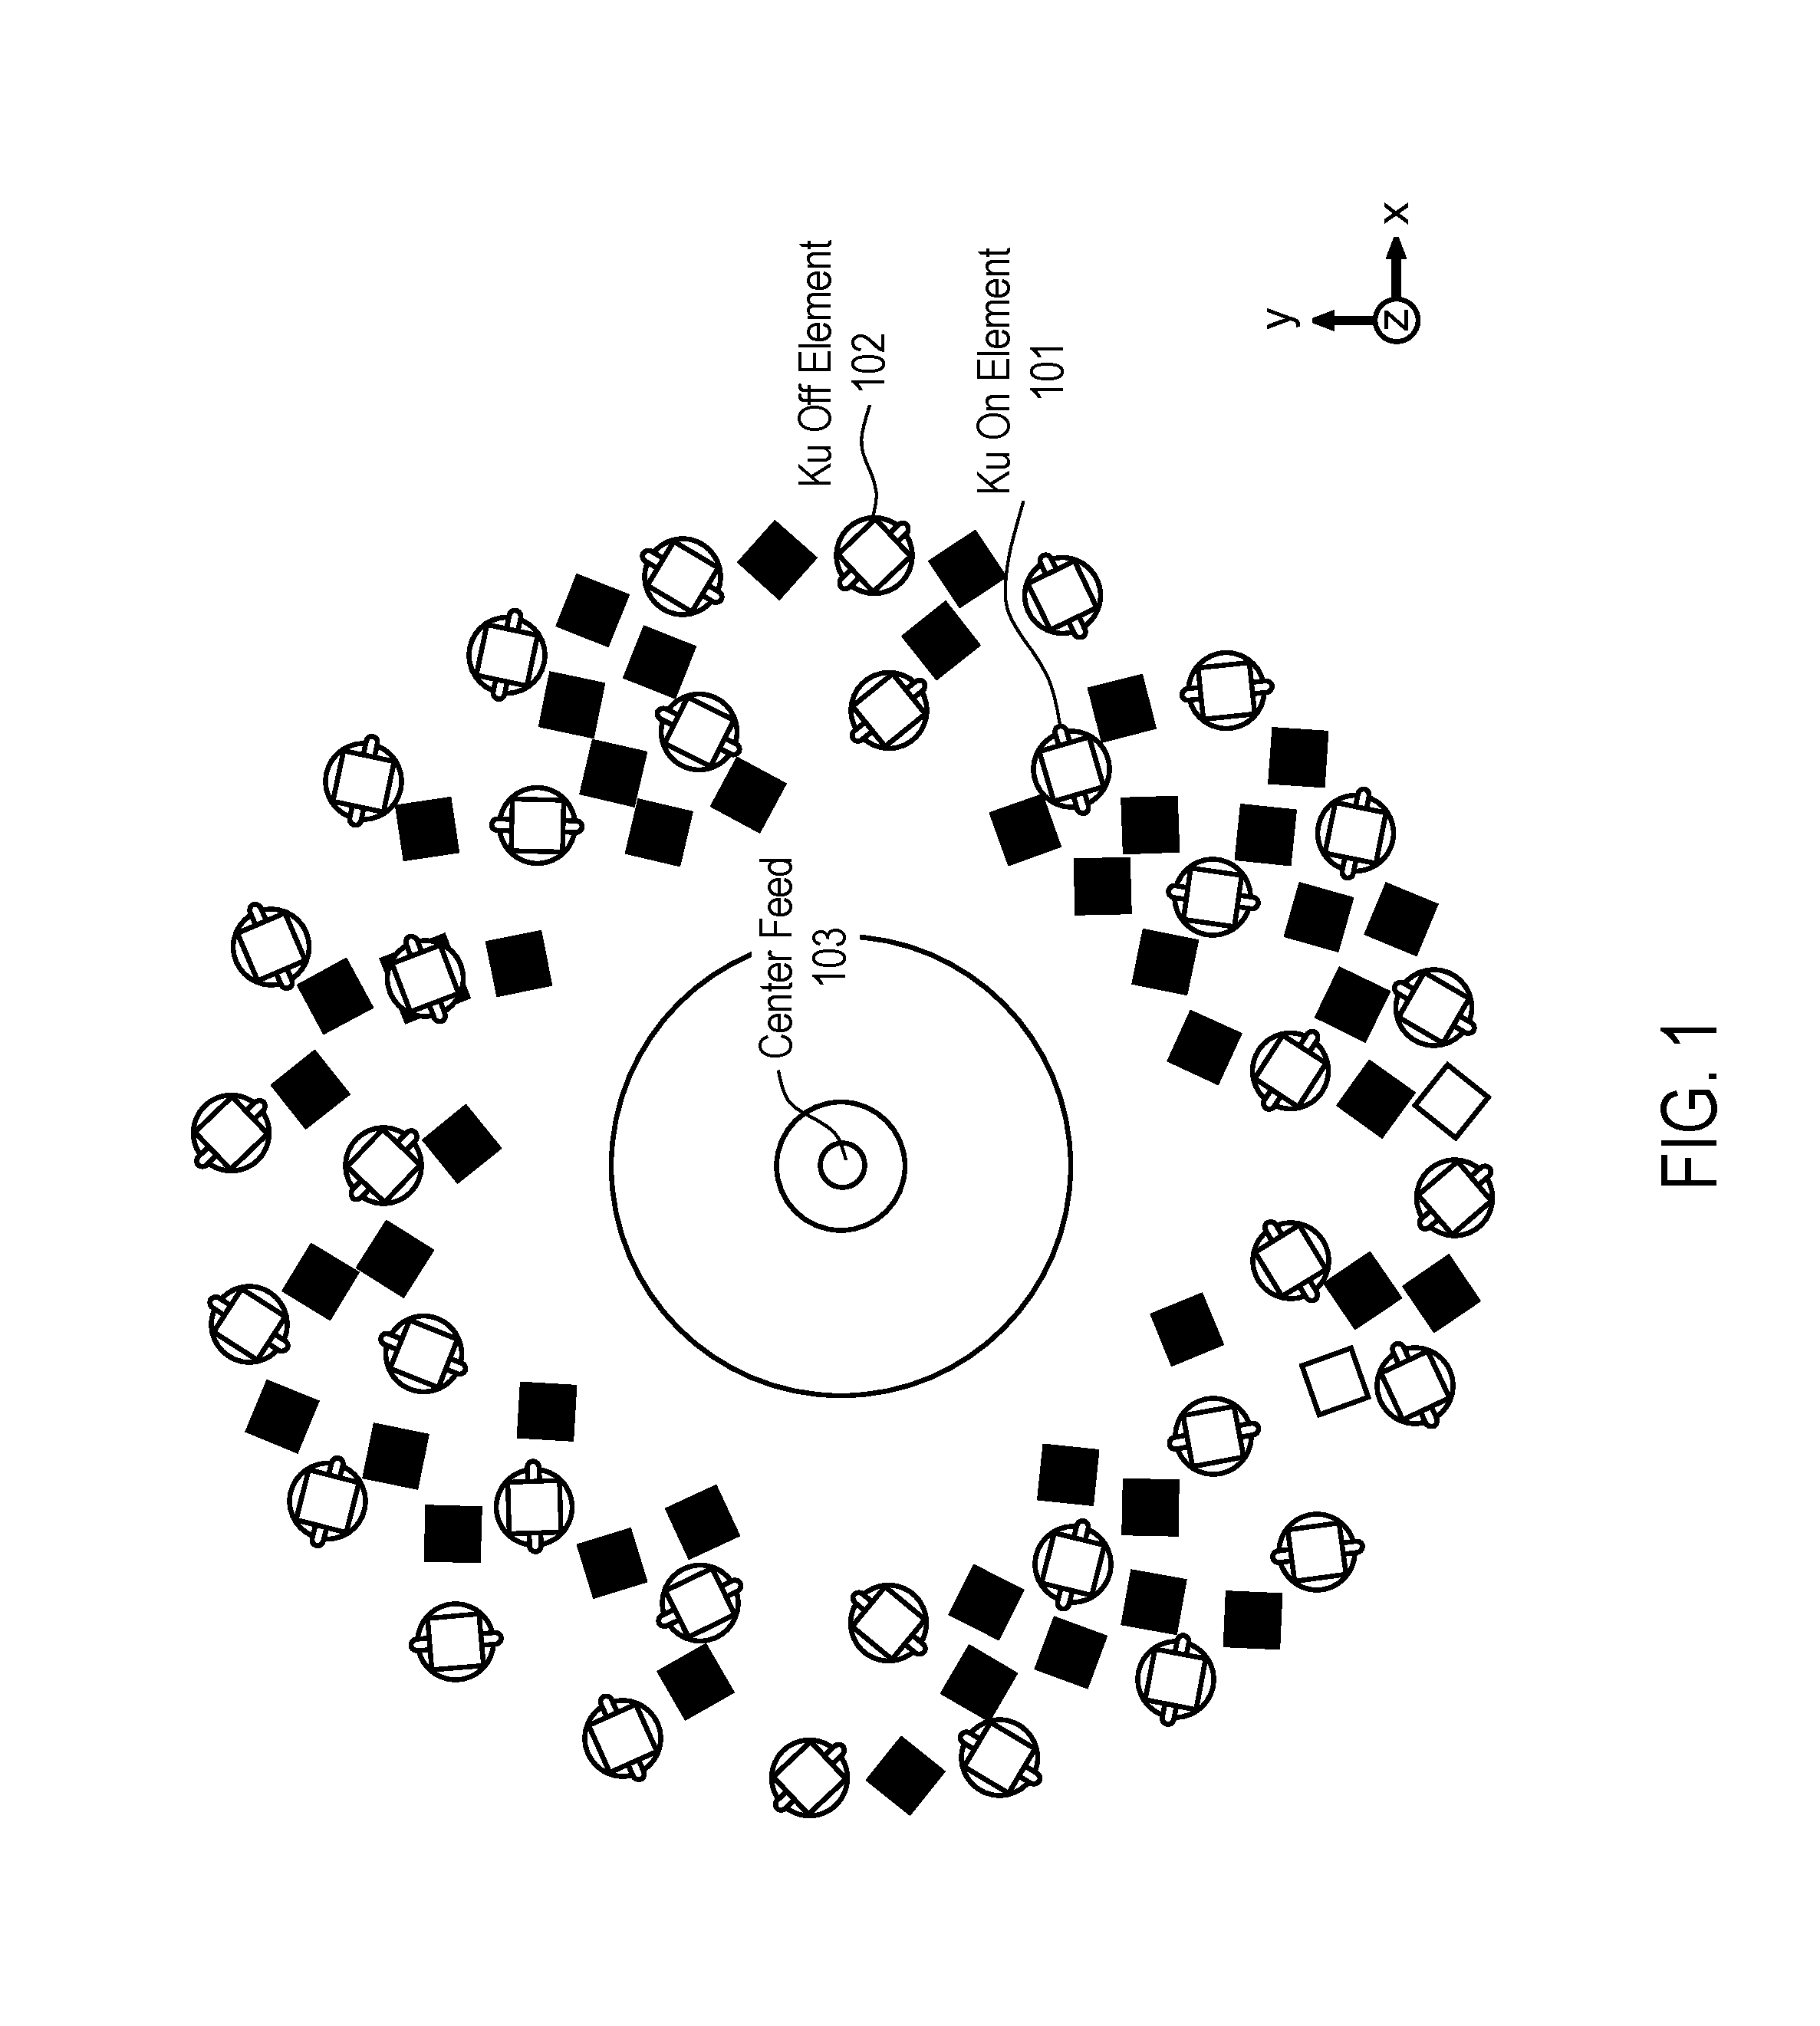 Combined antenna apertures allowing simultaneous multiple antenna functionality